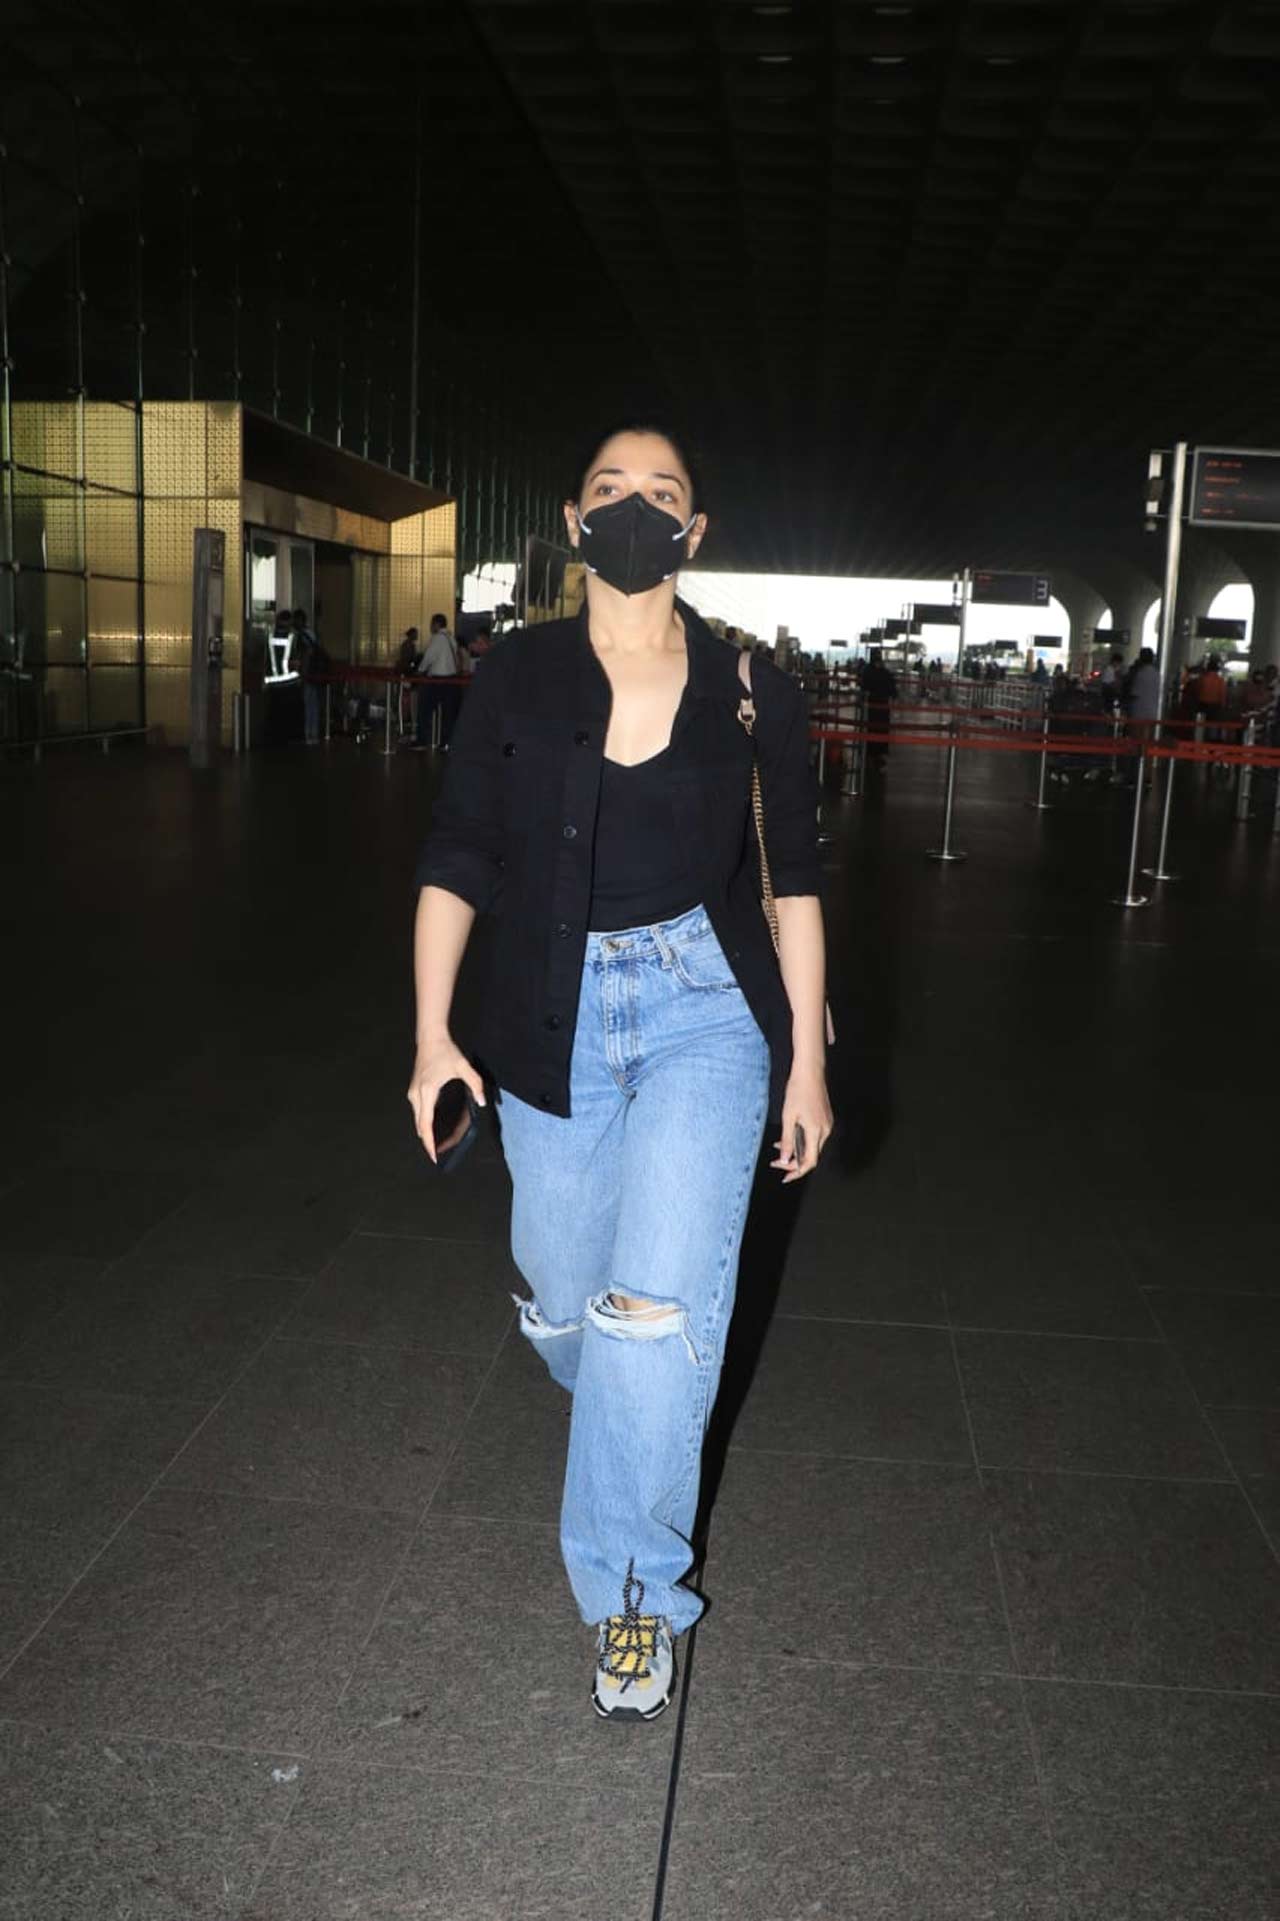 Tamannaah Bhatia, who was recently seen in the web series 'November Story' on Disney+ Hotstar VIP, was also spotted at the Mumbai airport. On the work front, she is now gearing up for the Telugu remake of the Hindi thriller 'Andhadhun'. The Telugu version is directed by Merlapaka Gandhi.